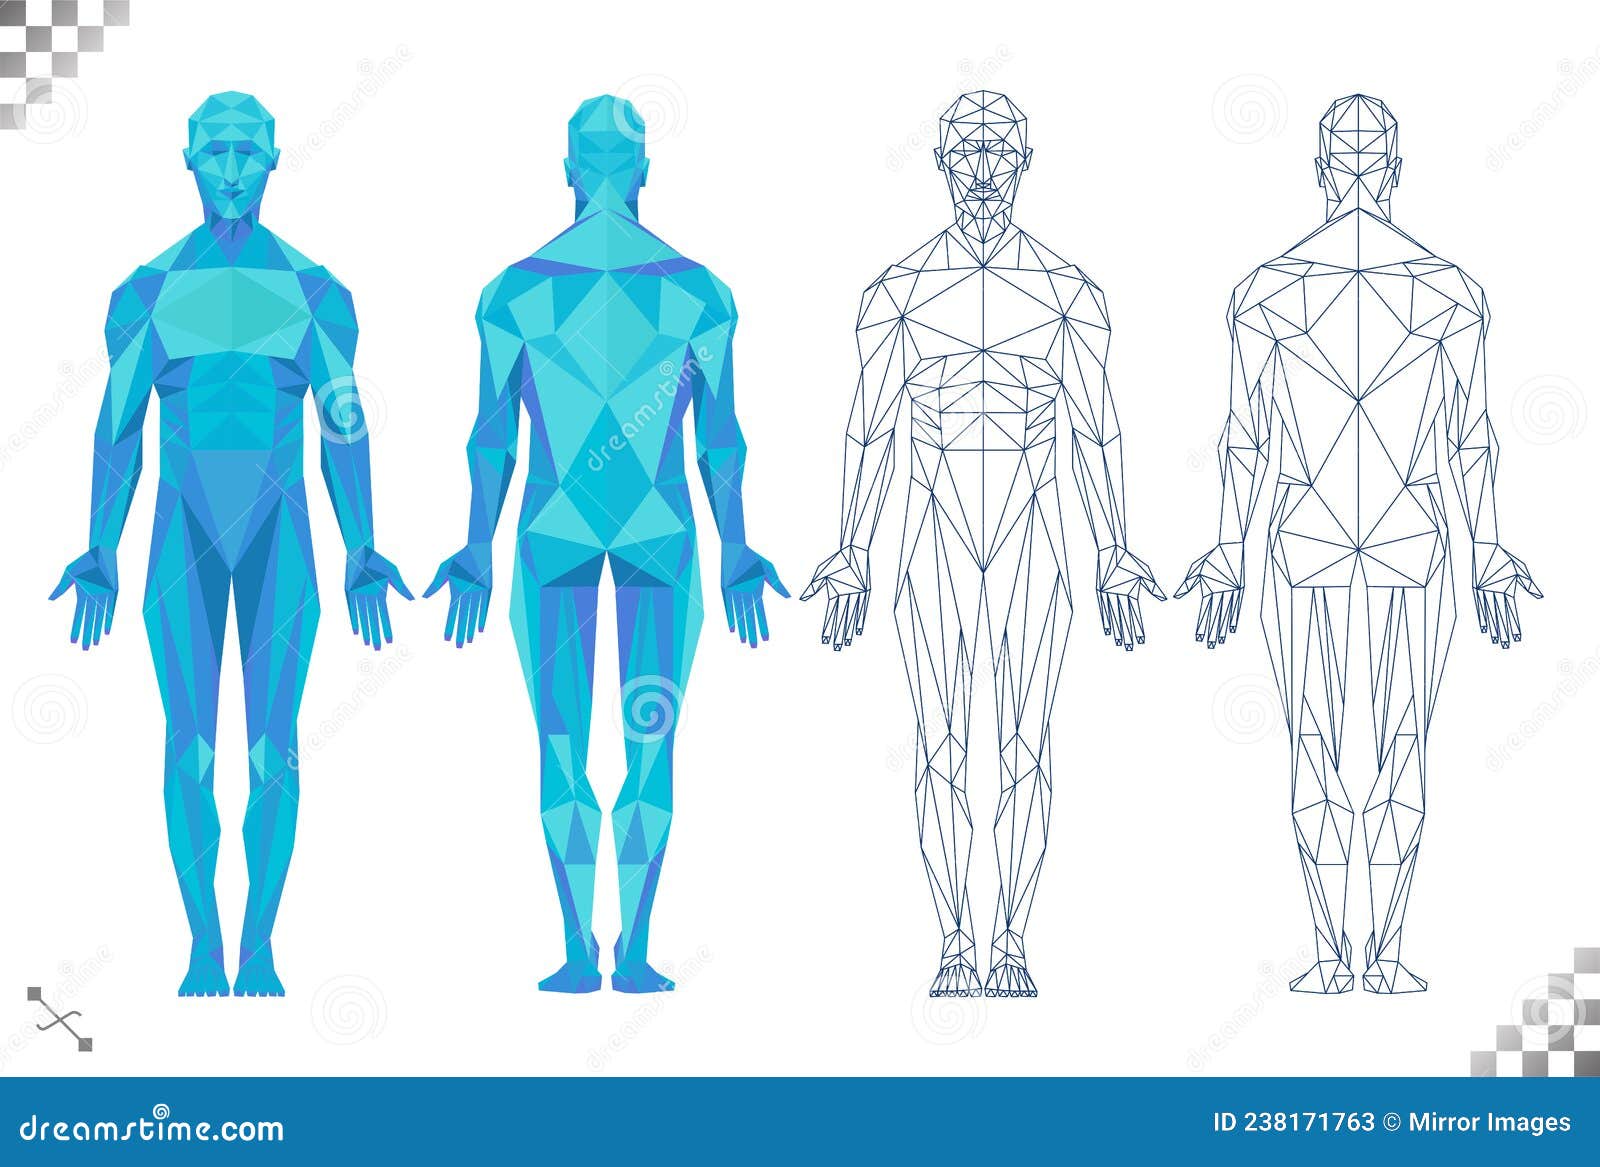 https://thumbs.dreamstime.com/z/low-poly-human-body-black-line-triangles-blue-geometric-muscle-anatomy-shapes-diagram-full-frontal-back-high-tech-color-art-238171763.jpg